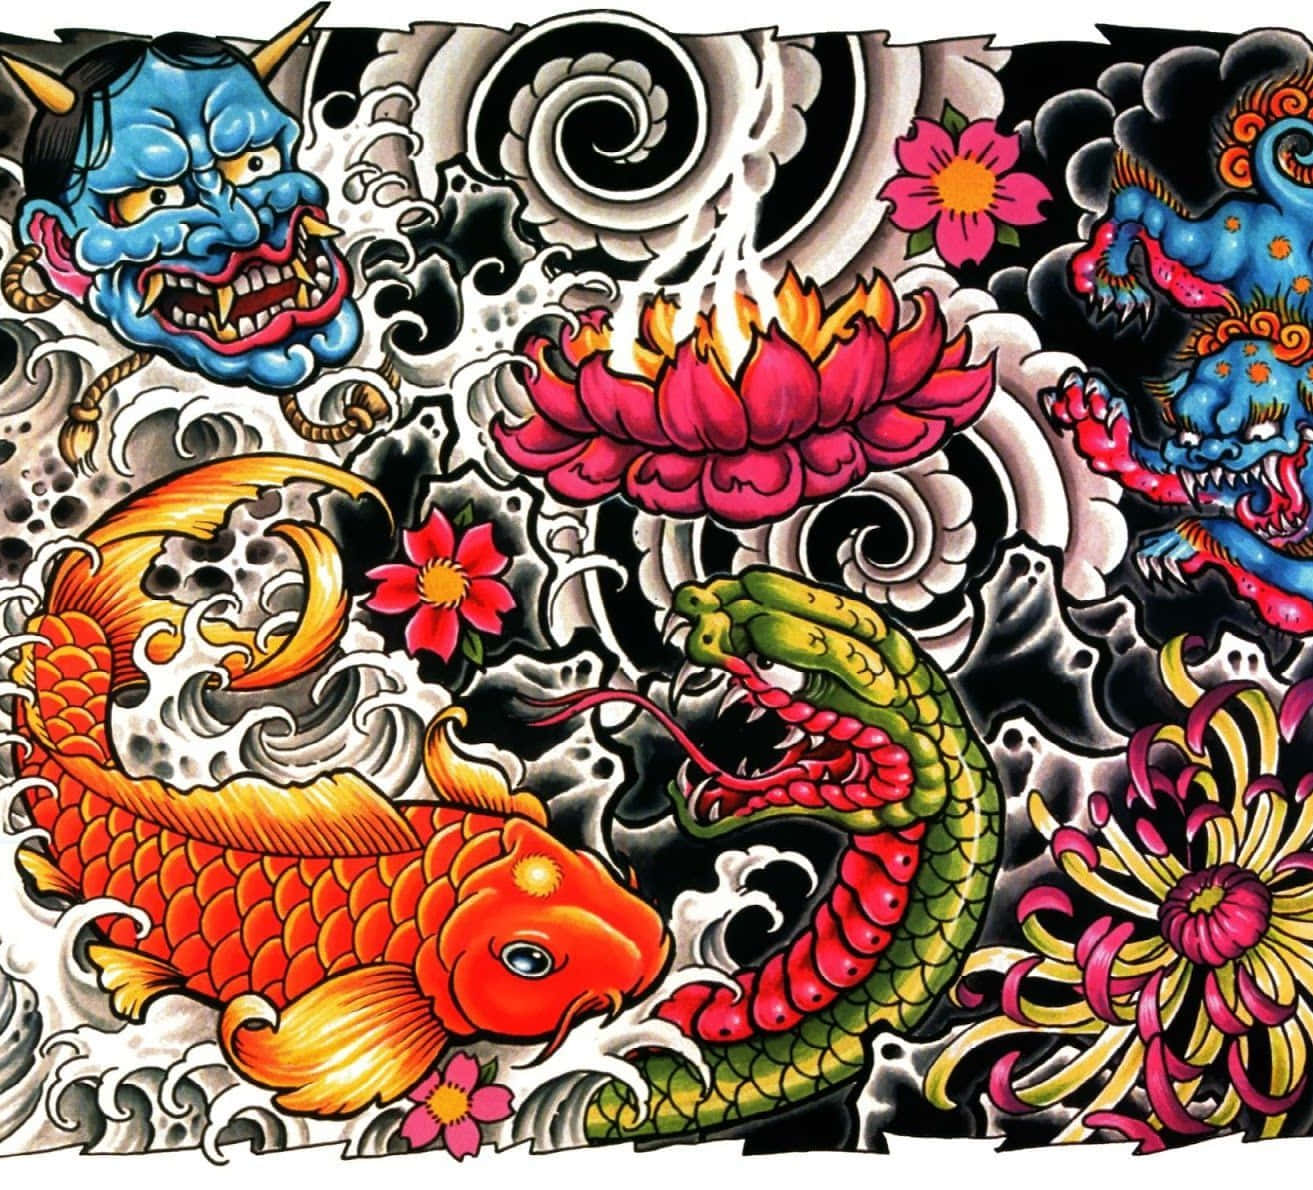 A detailed and colorful Japanese Tattoo on the arm